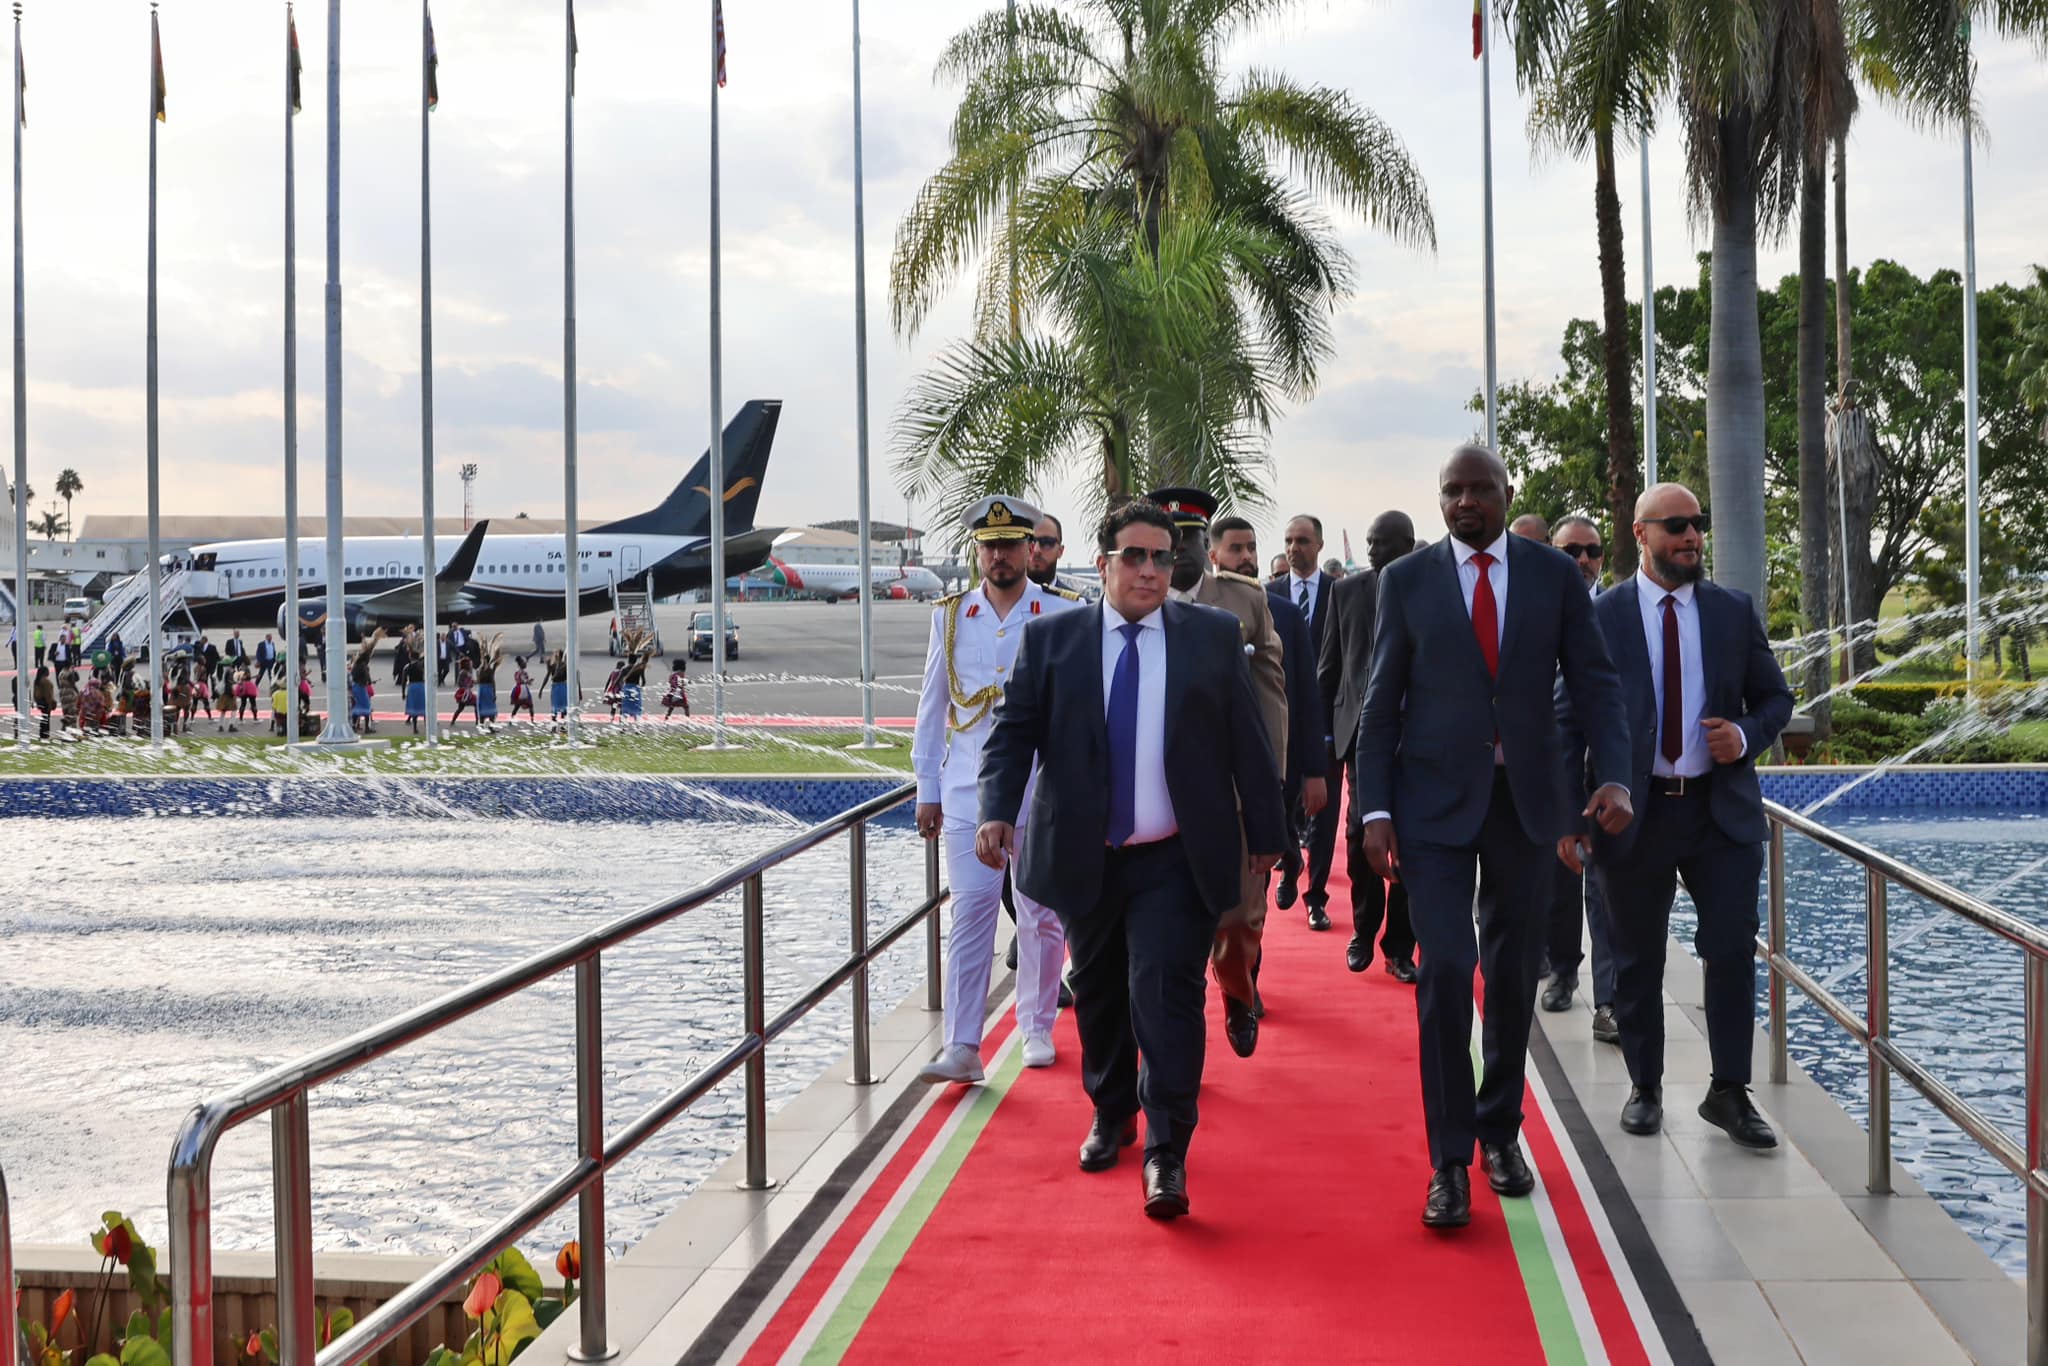 Mnifi arrives in Nairobi to participate in the meeting of the African Development Bank.